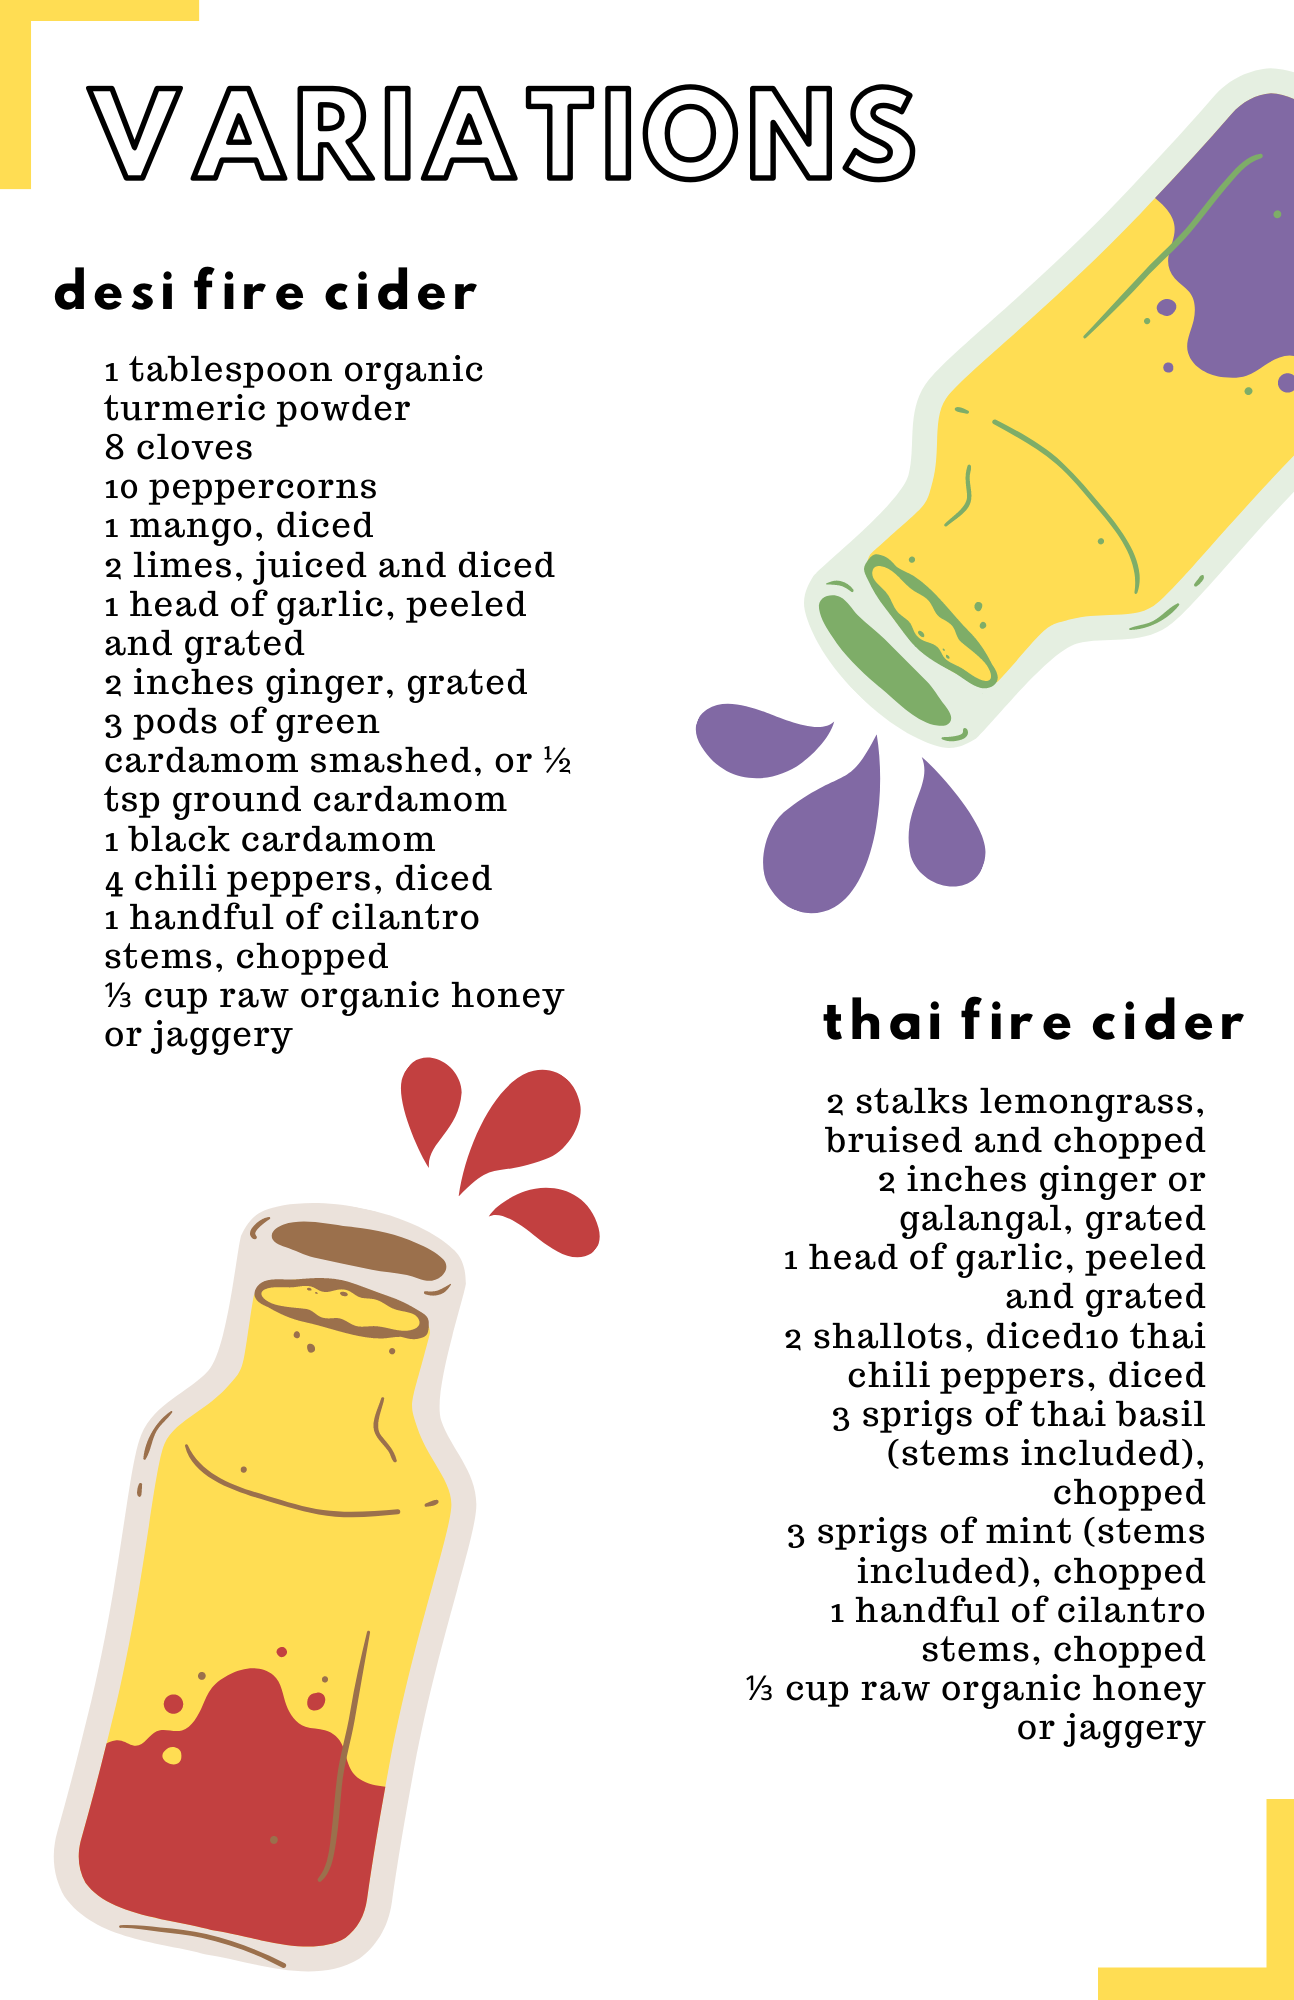 Fire cider recipe with Desi and Thai variations.